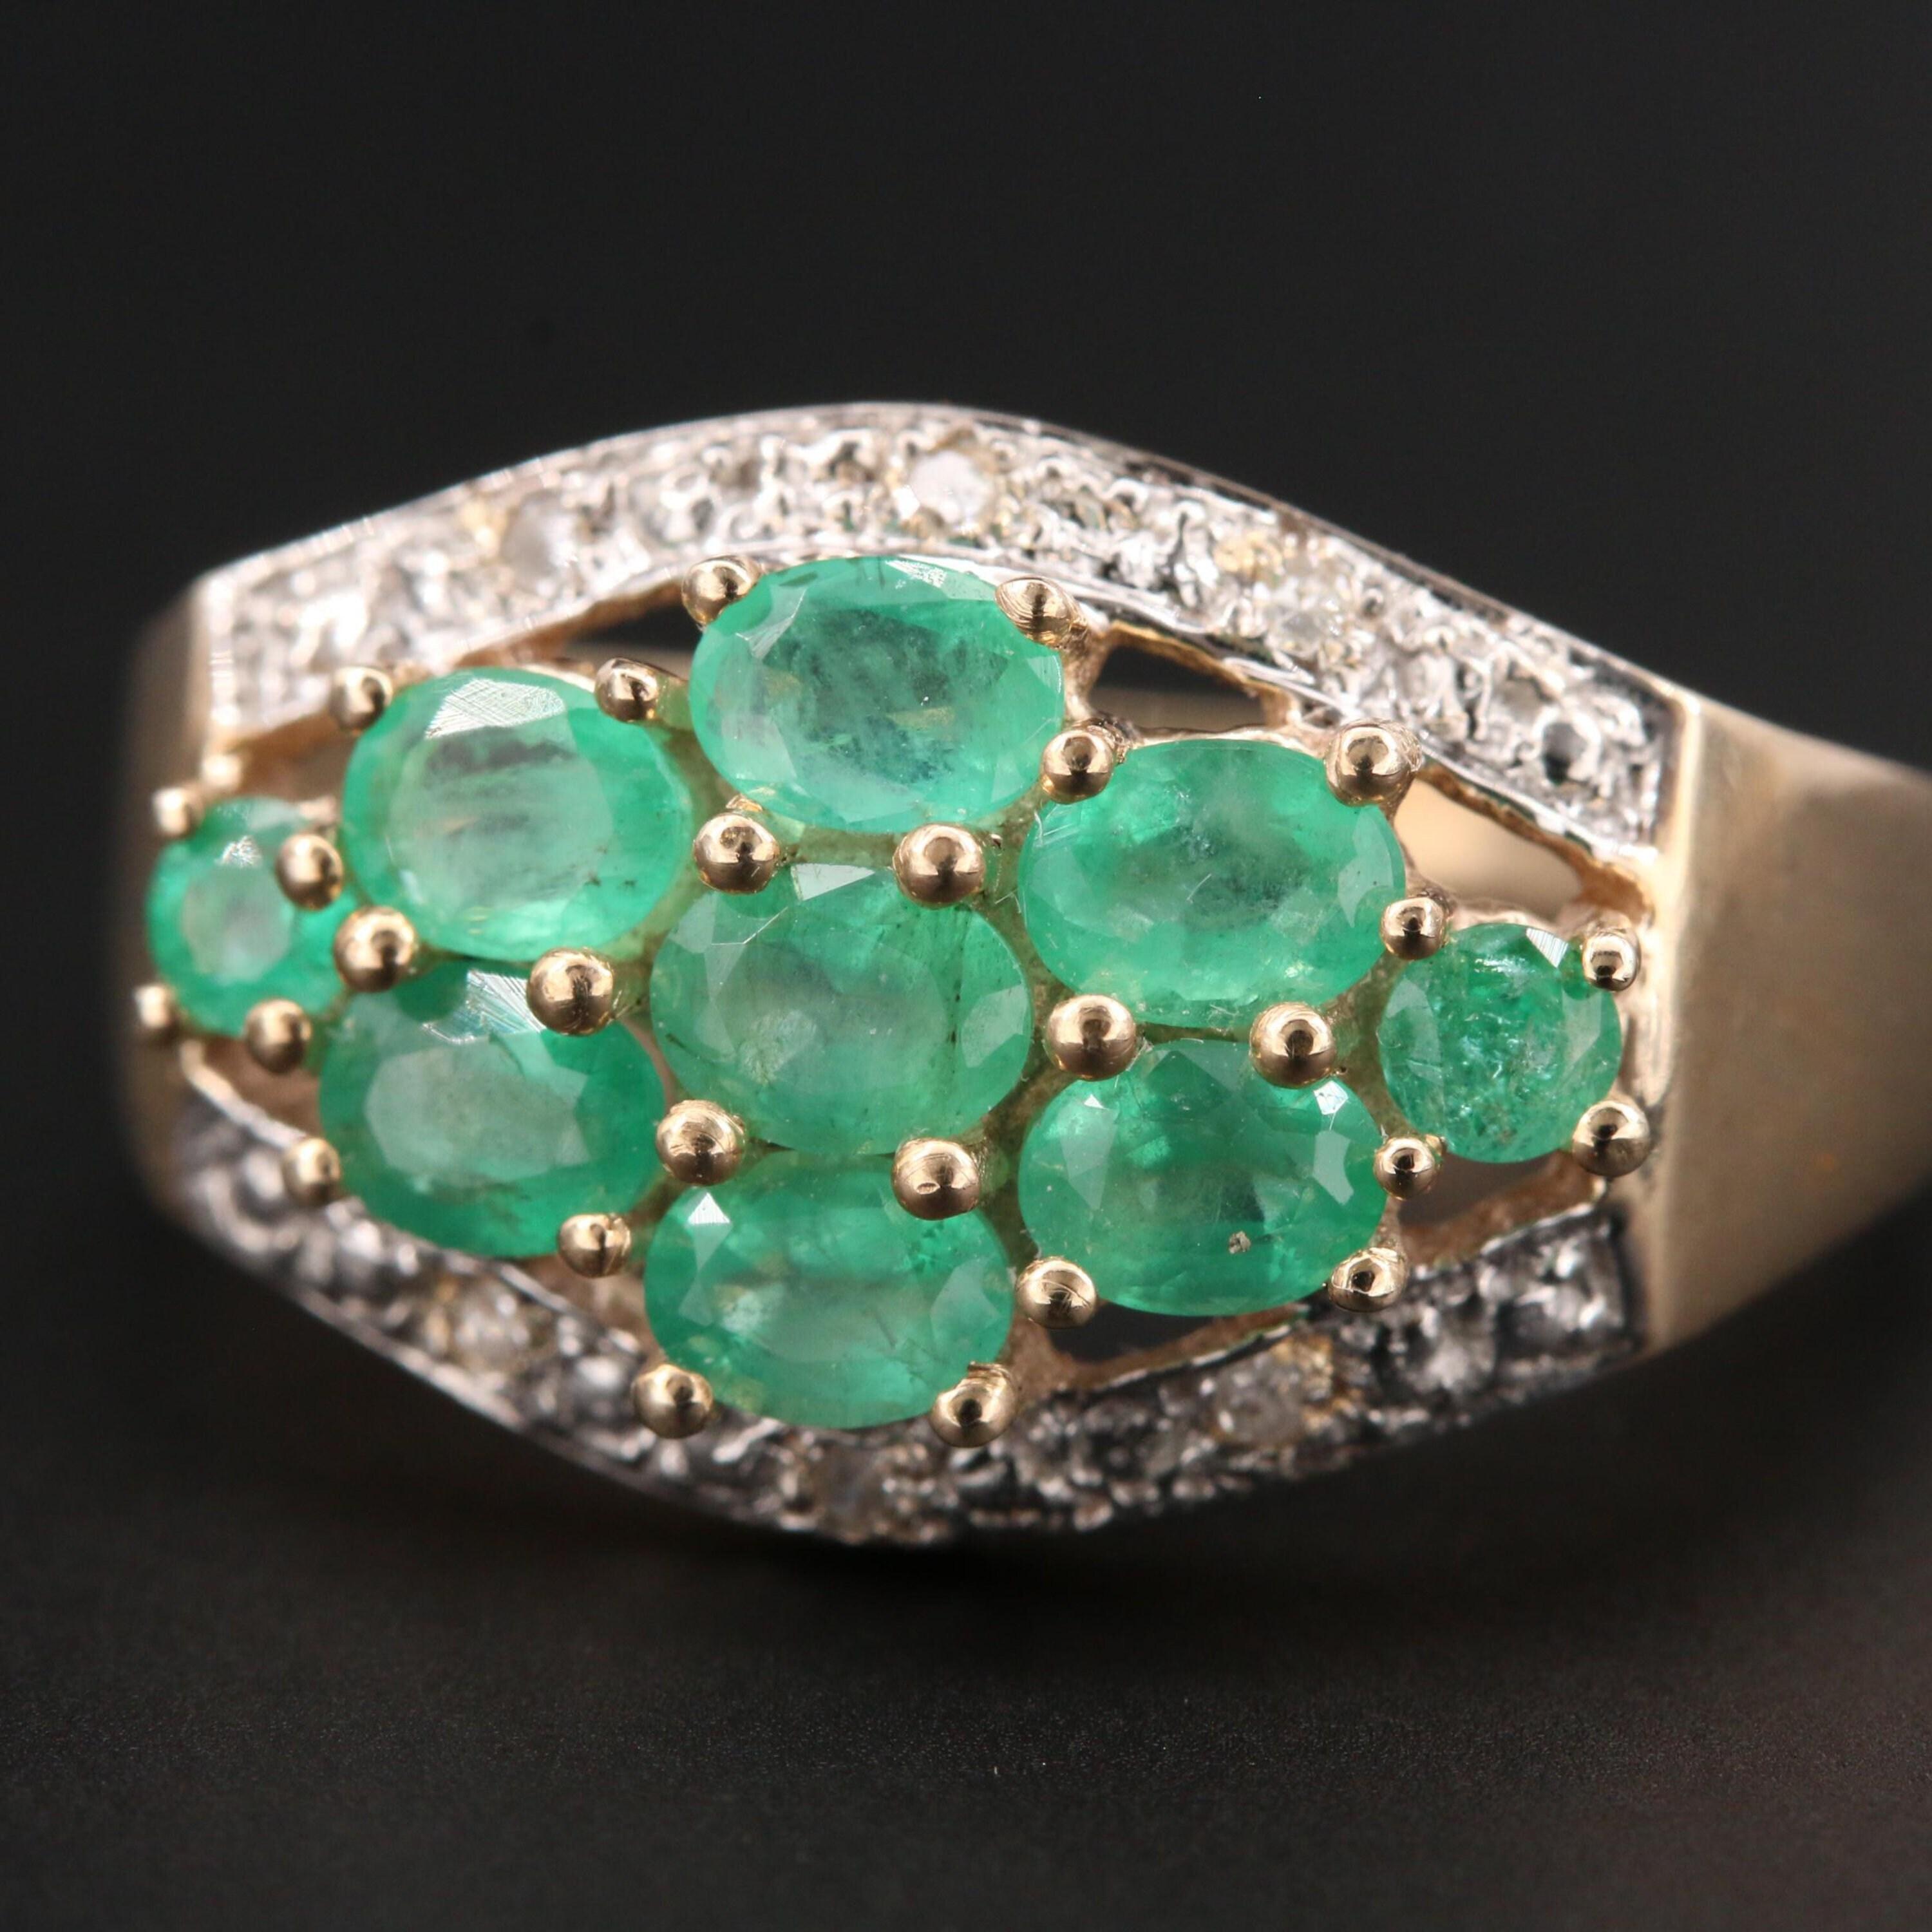 For Sale:  Halo Emerald Engagement Ring, Antique Emerald Wedding Ring 6